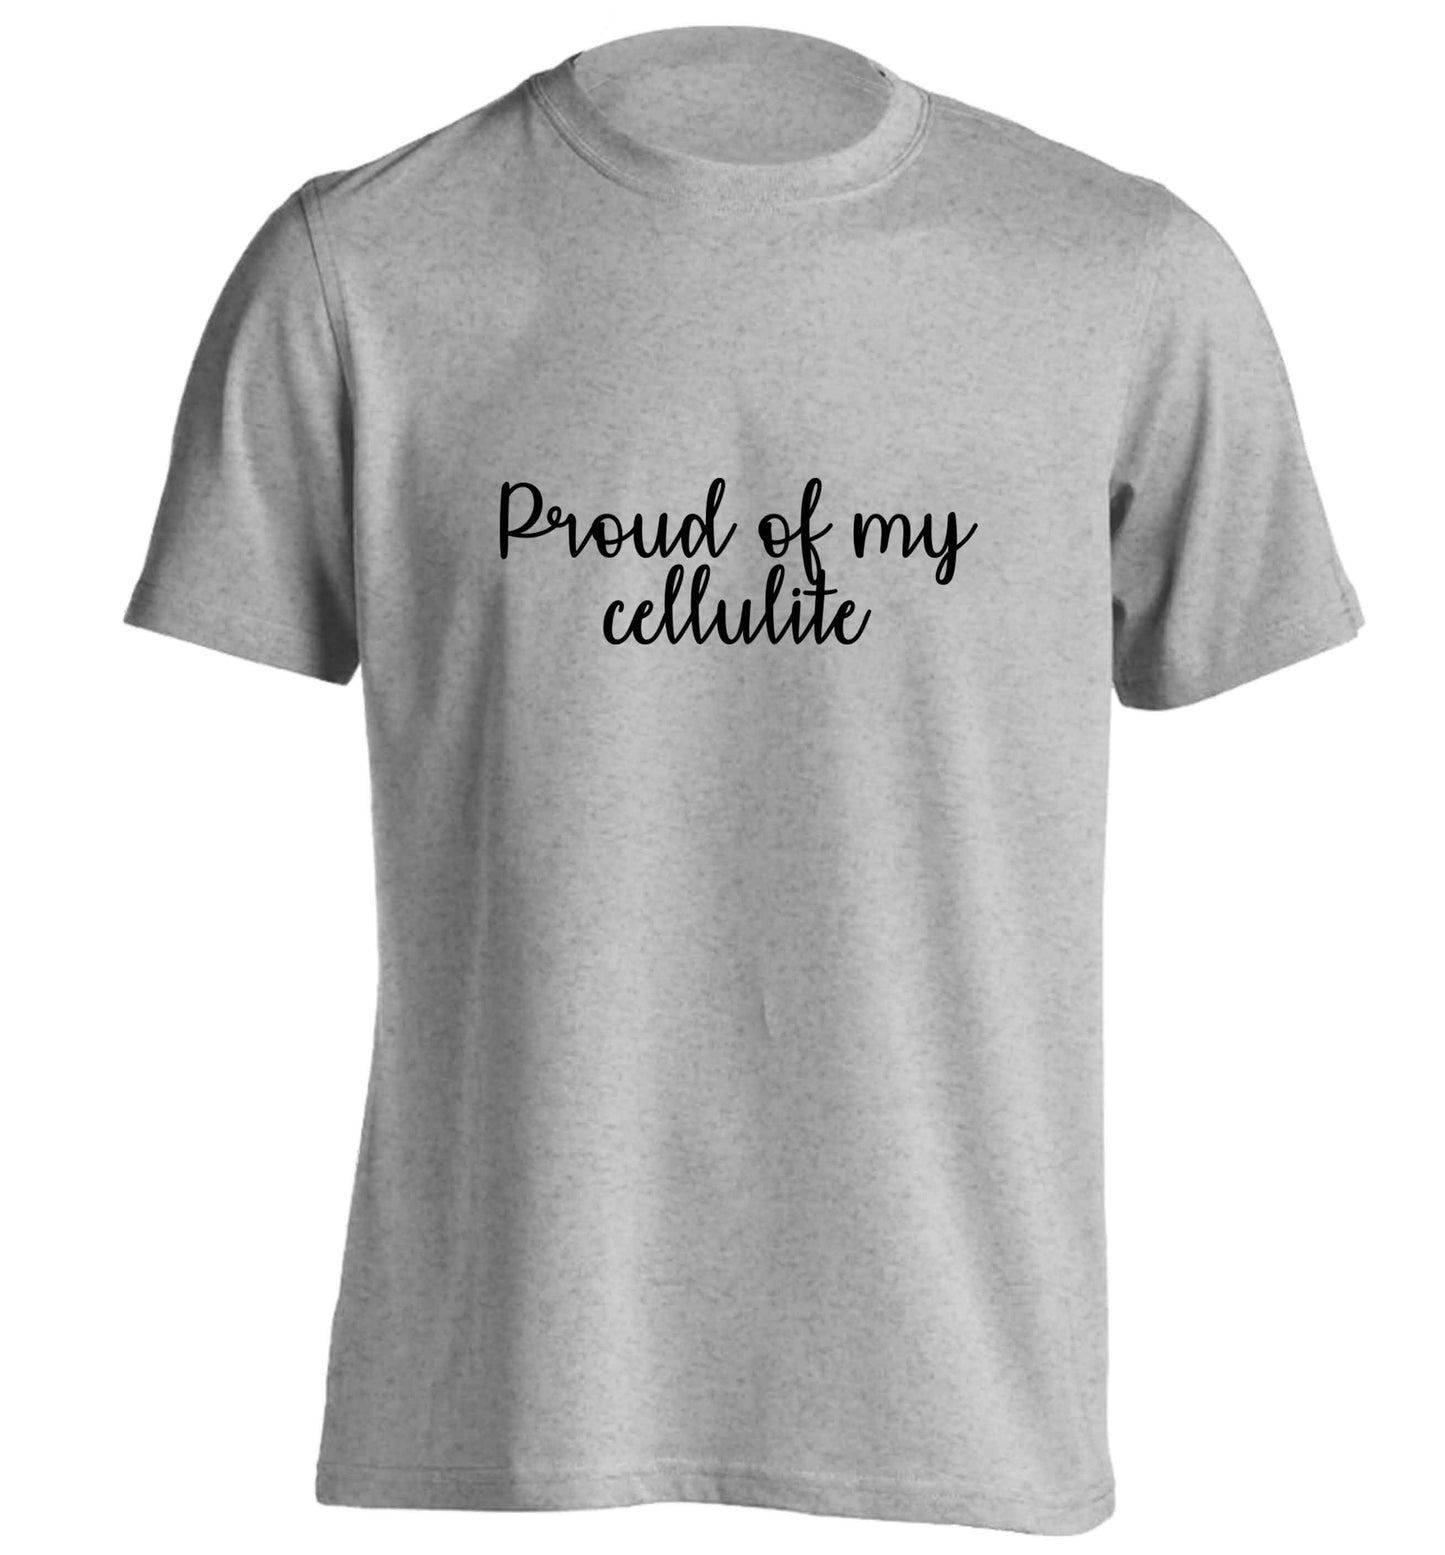 Proud of my cellulite adults unisex grey Tshirt 2XL